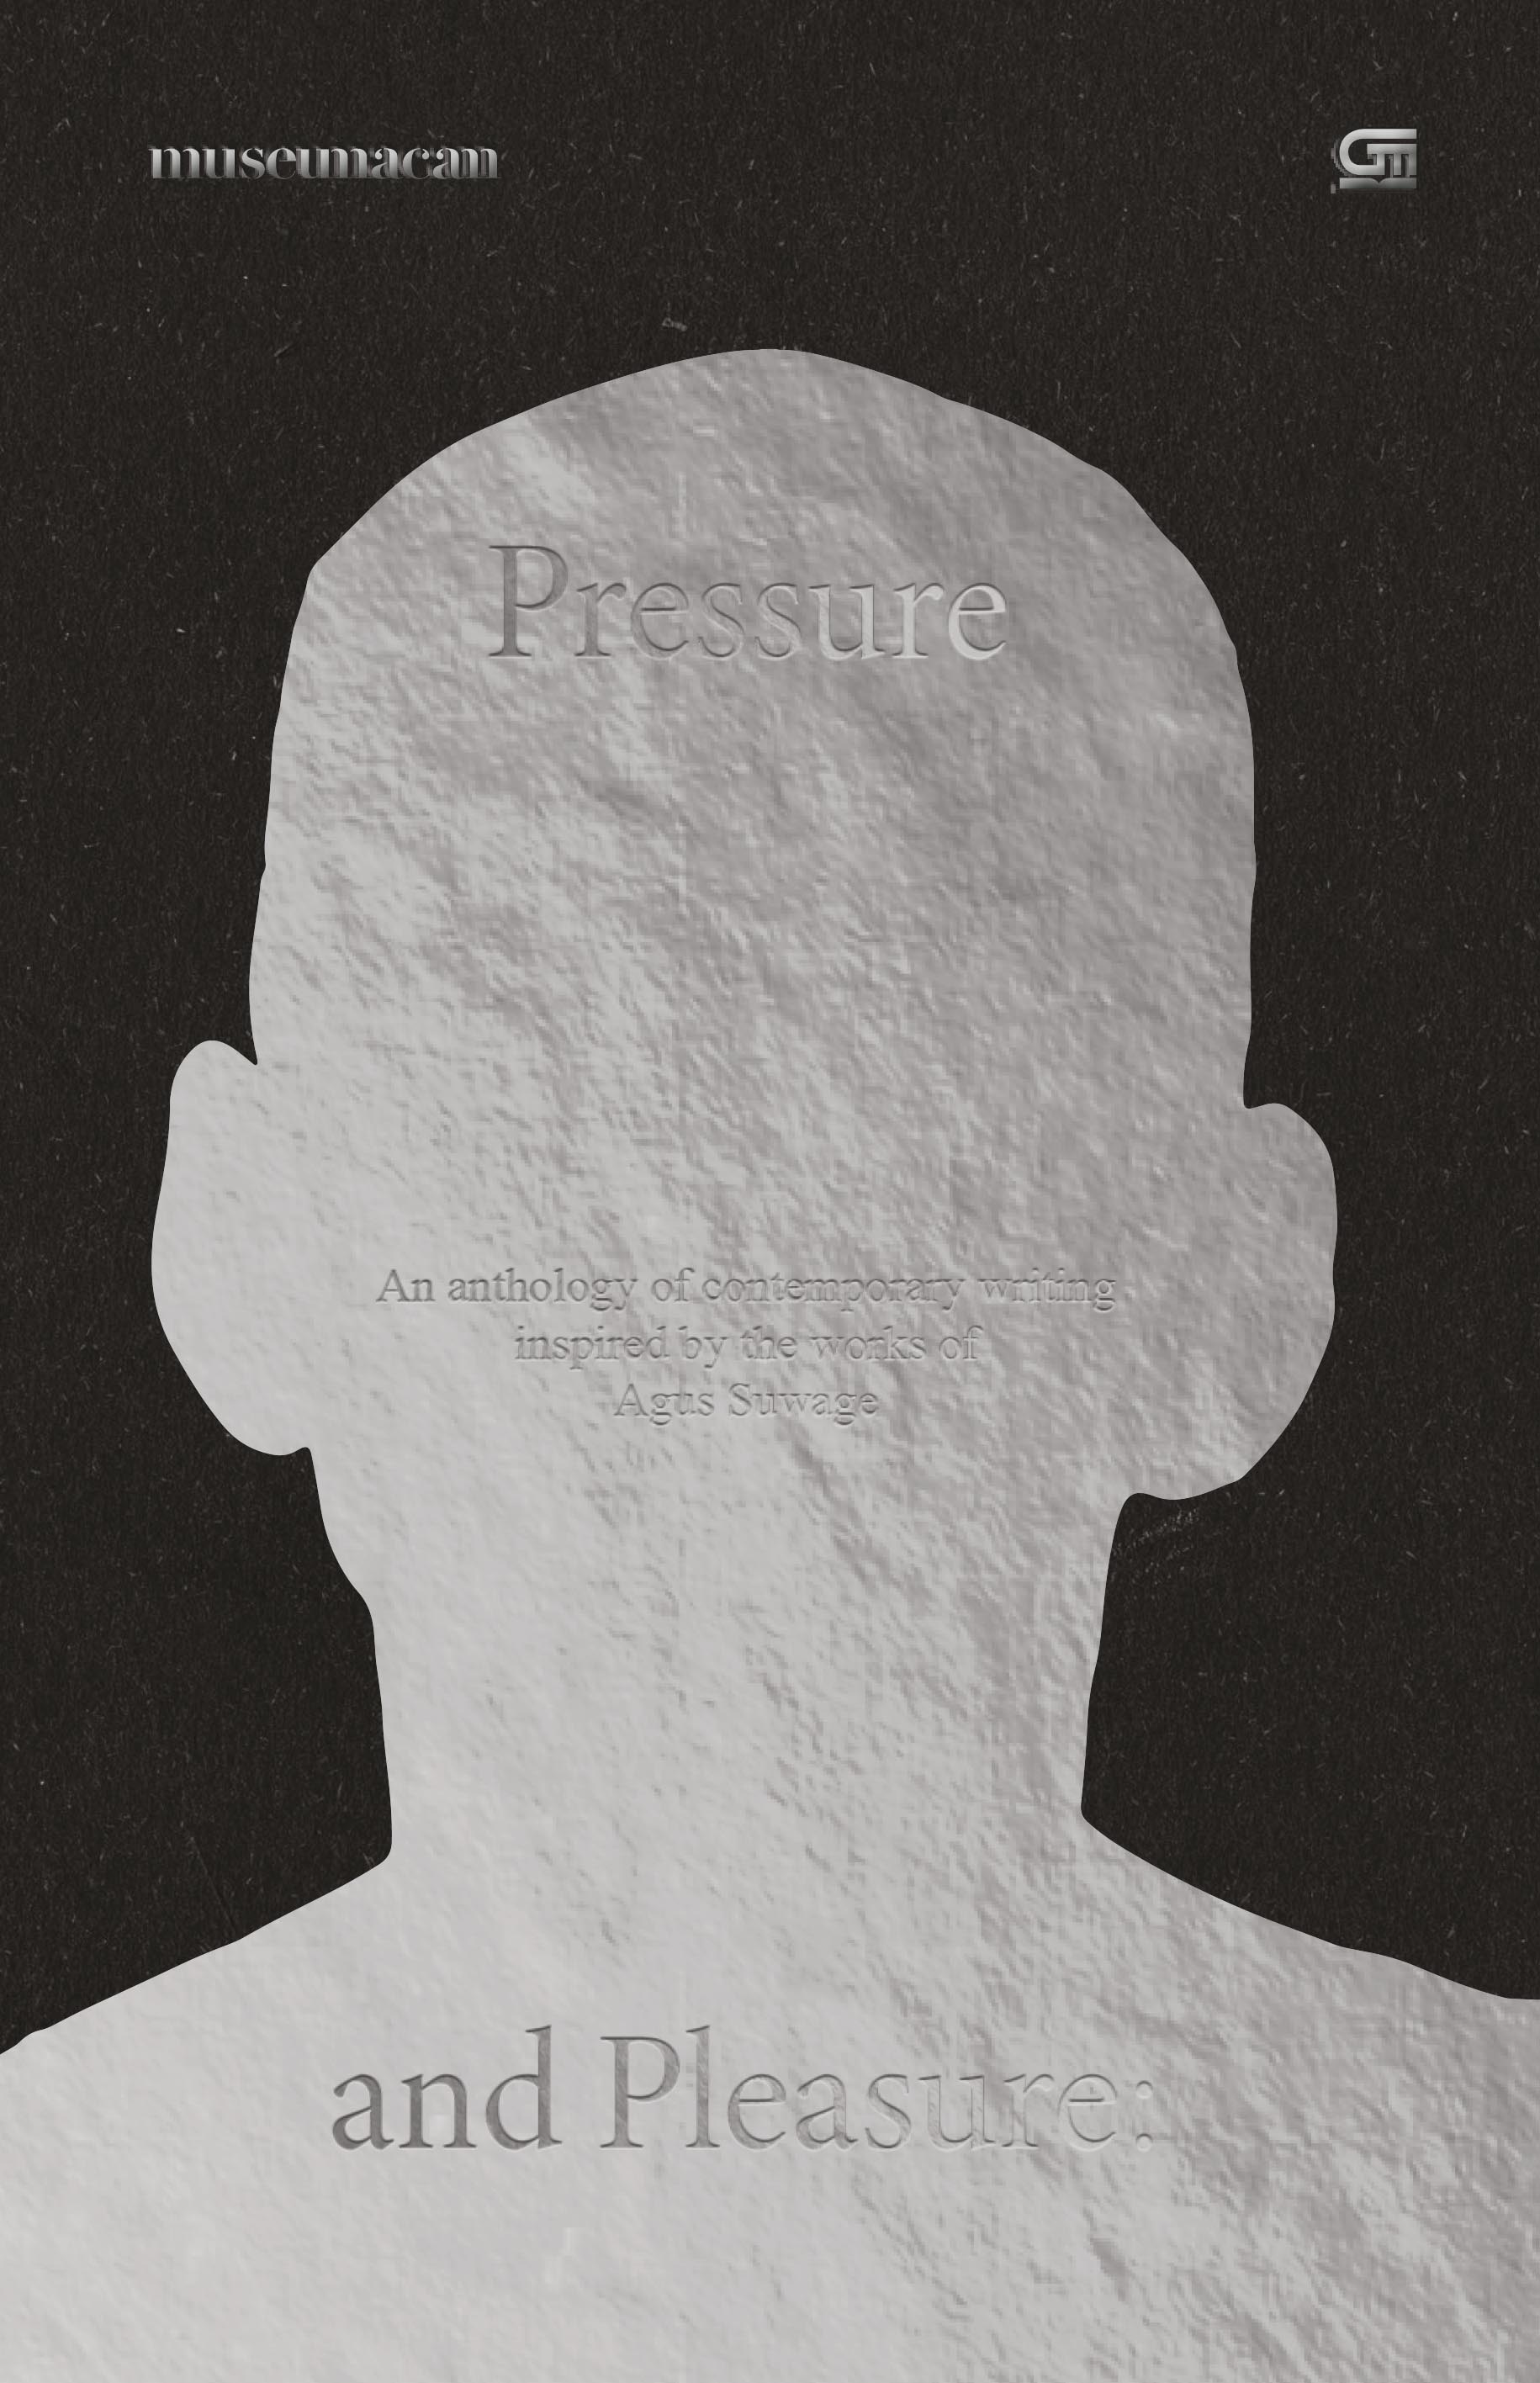 Pressure and pleasure :  an anthology of contemporary writing inspired by the works of Agus Suwage